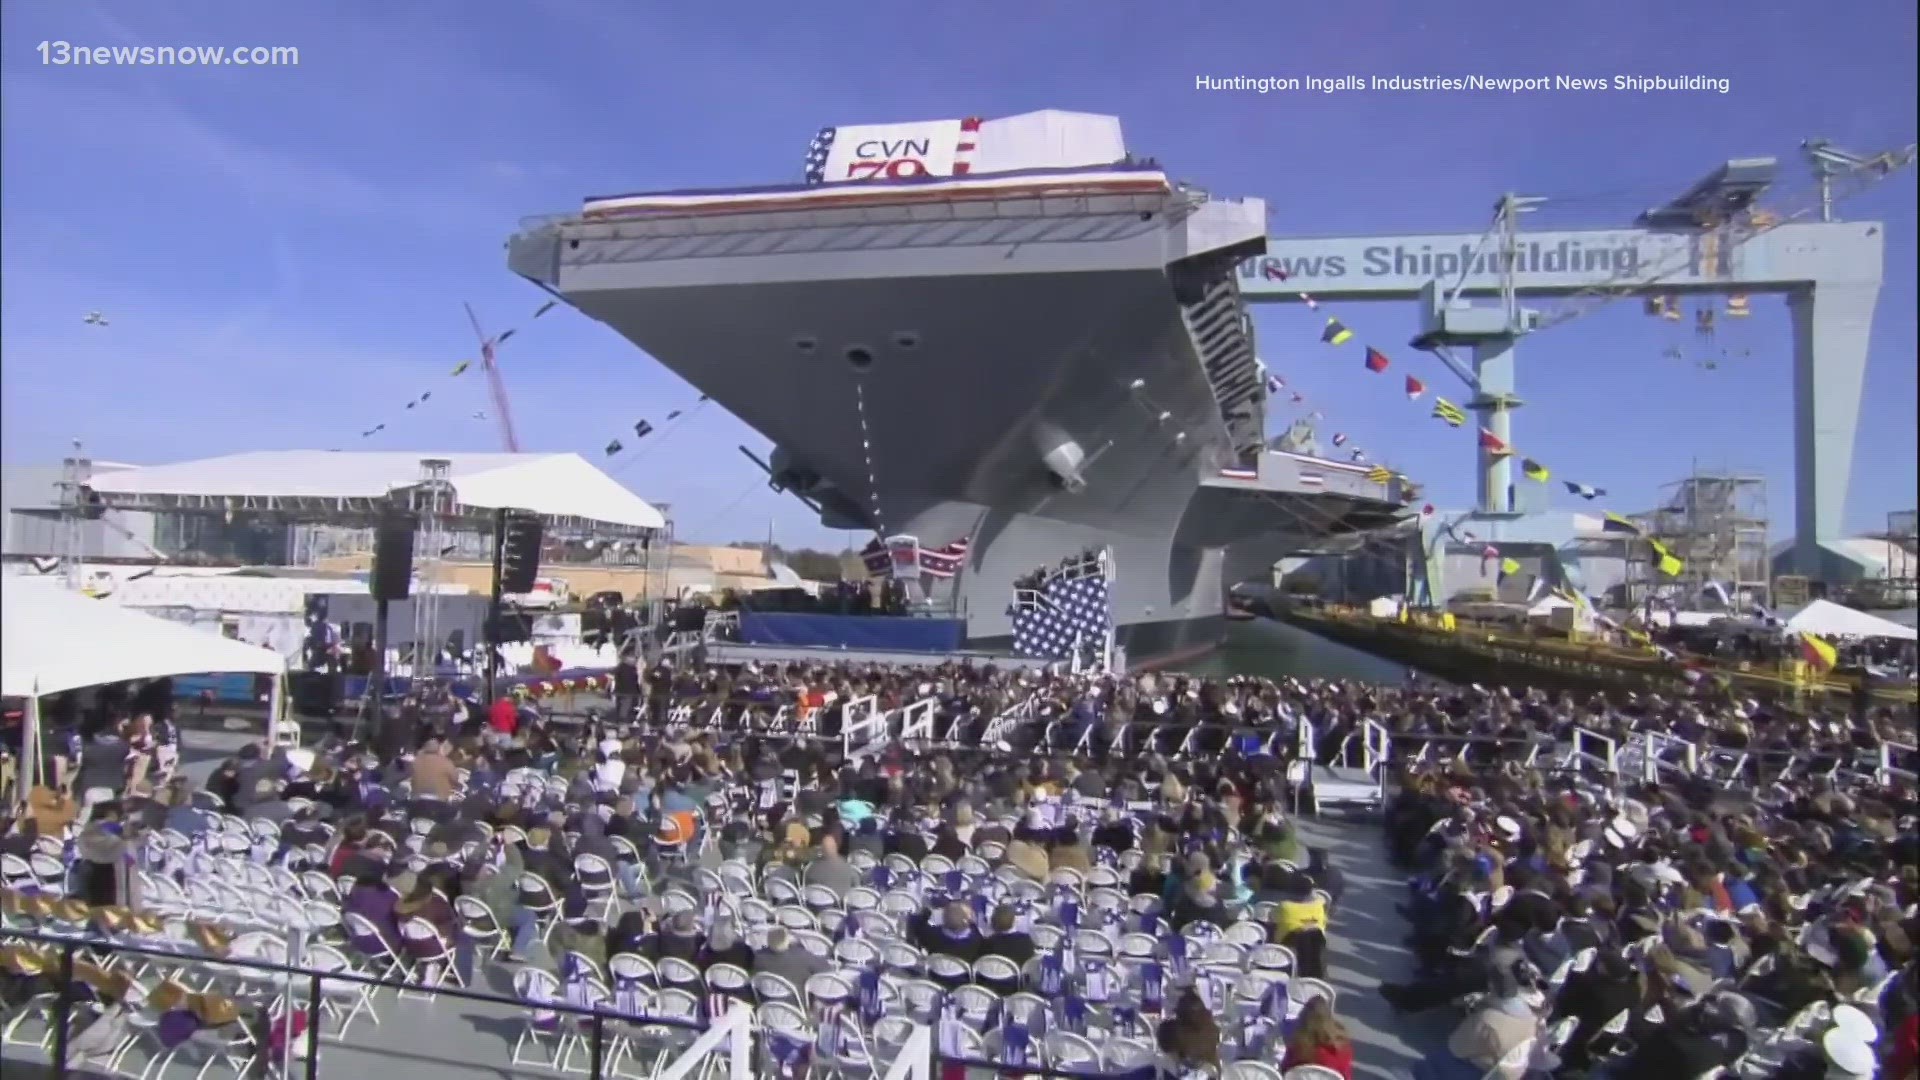 The future USS John F. Kennedy, which is under construction at Newport News Shipbuilding, will be ready for the Navy one year later than earlier projected.